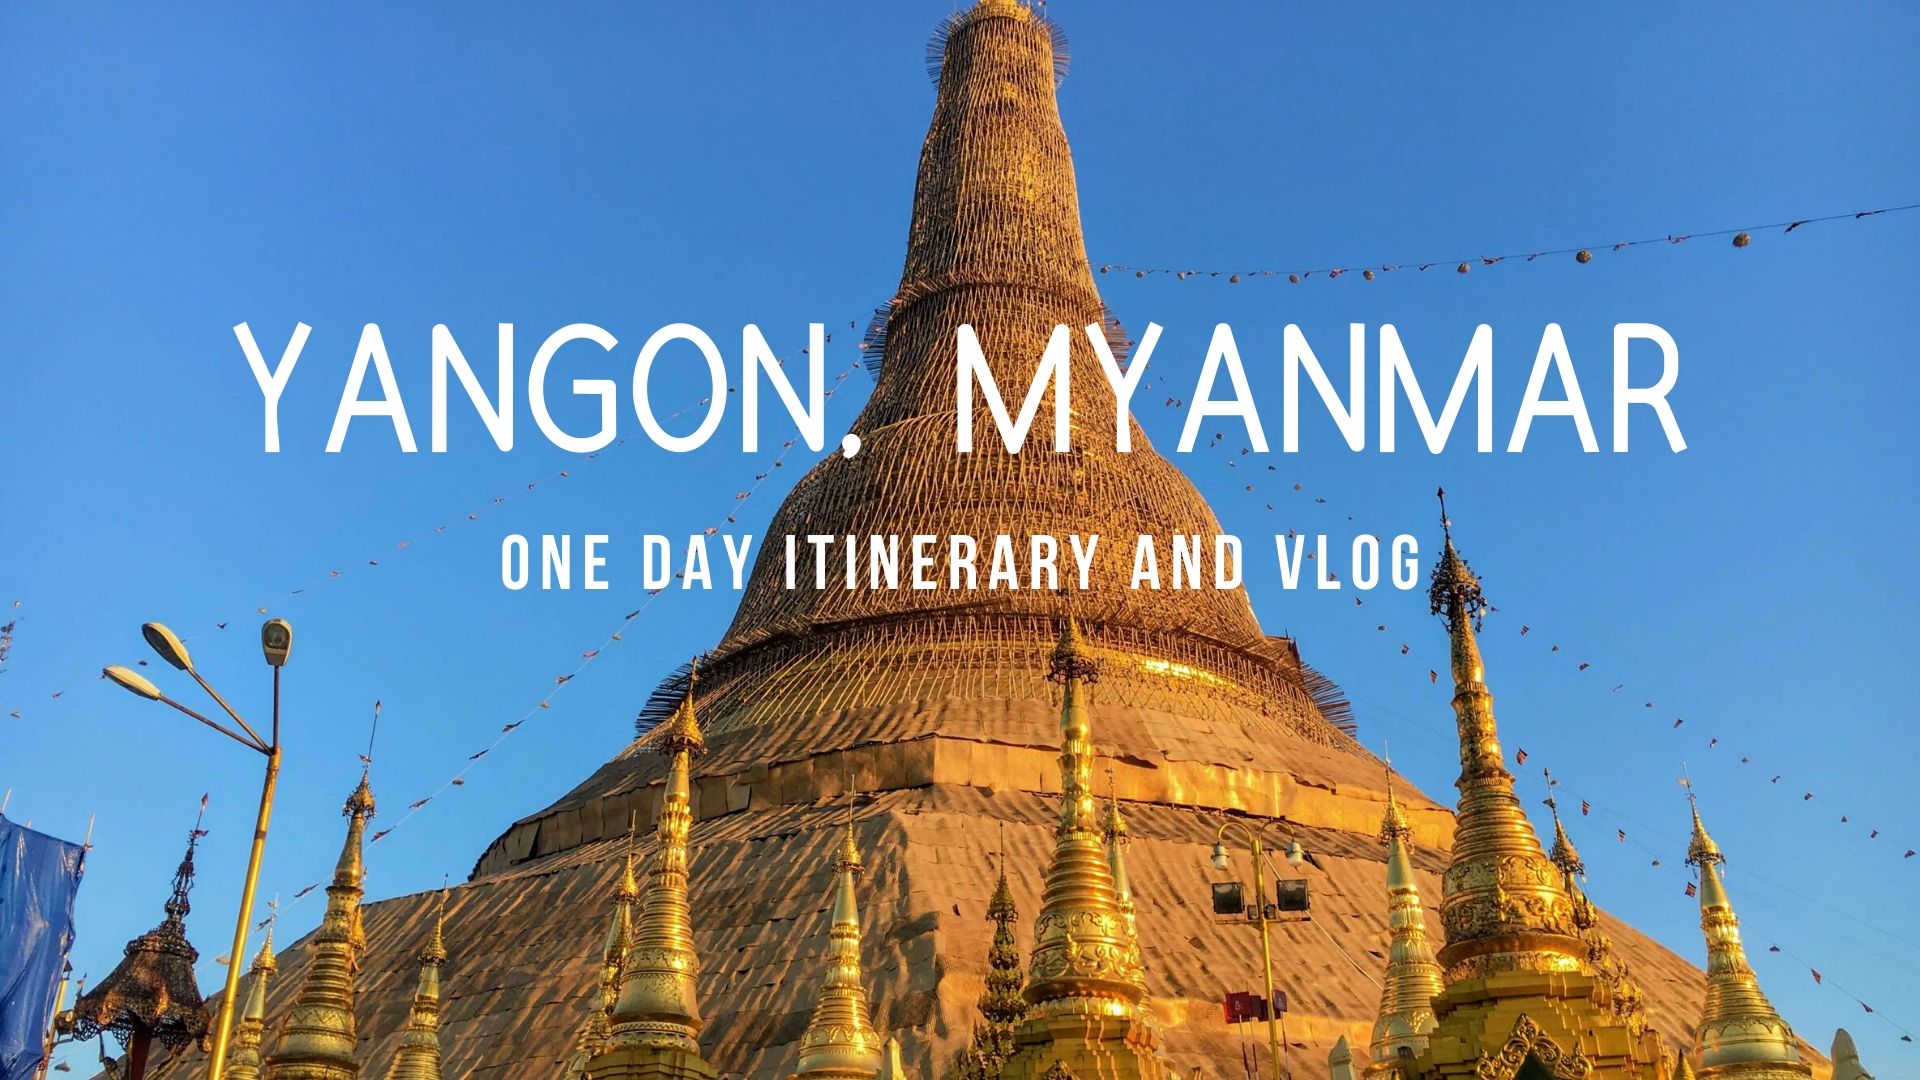 One Day In Yangon Itinerary